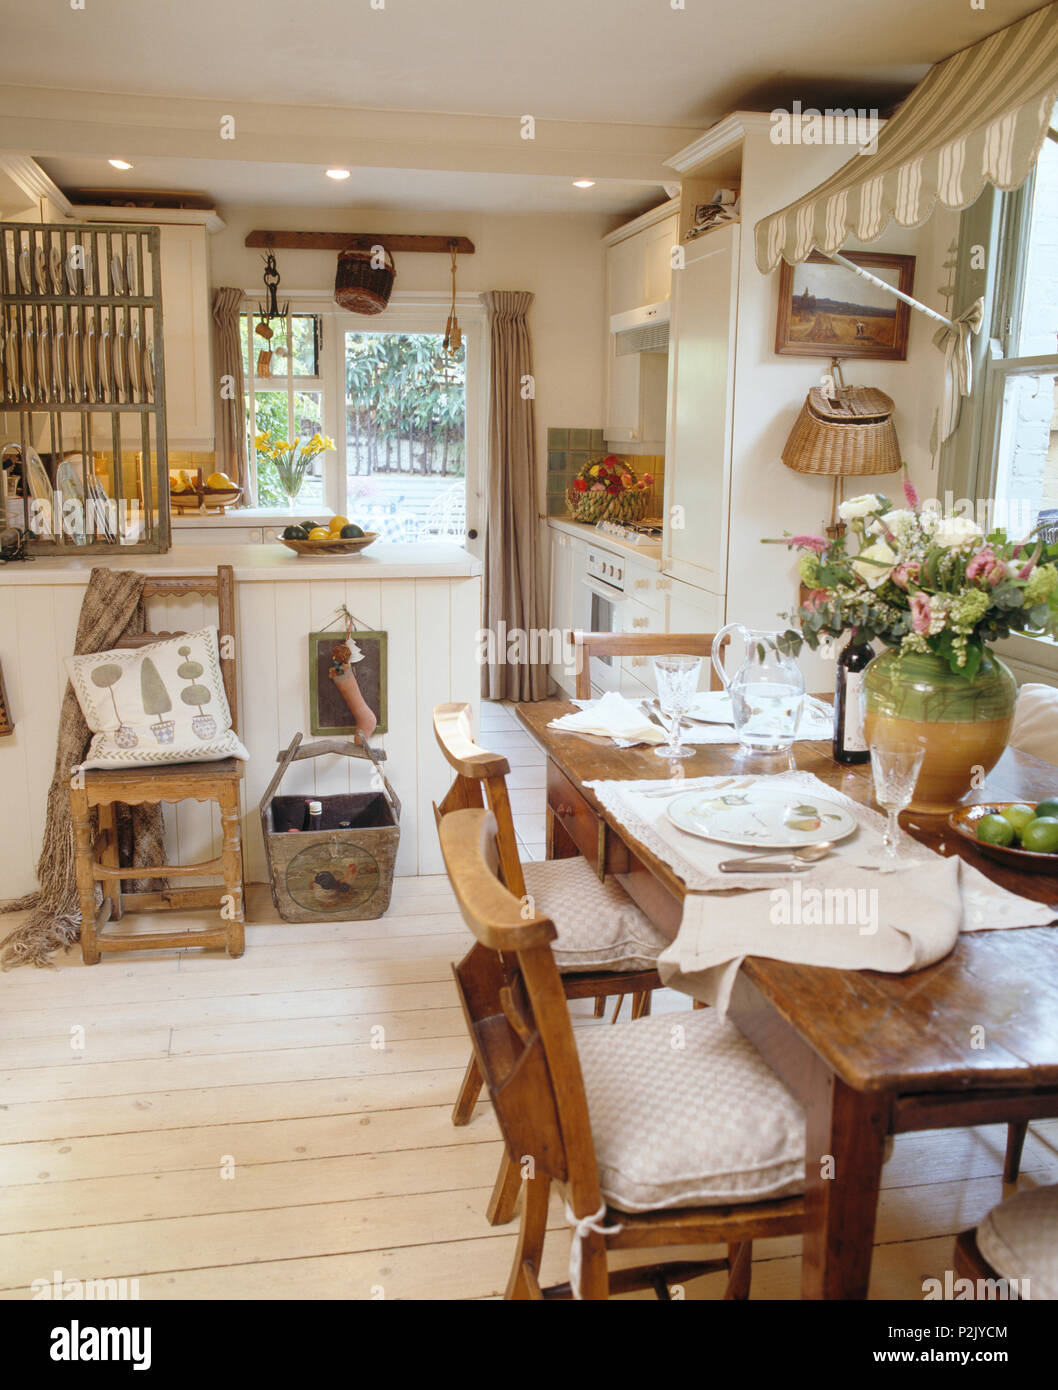 Old chapel chairs at simple wood table in country kitchen dining room with white painted floorboards Stock Photo